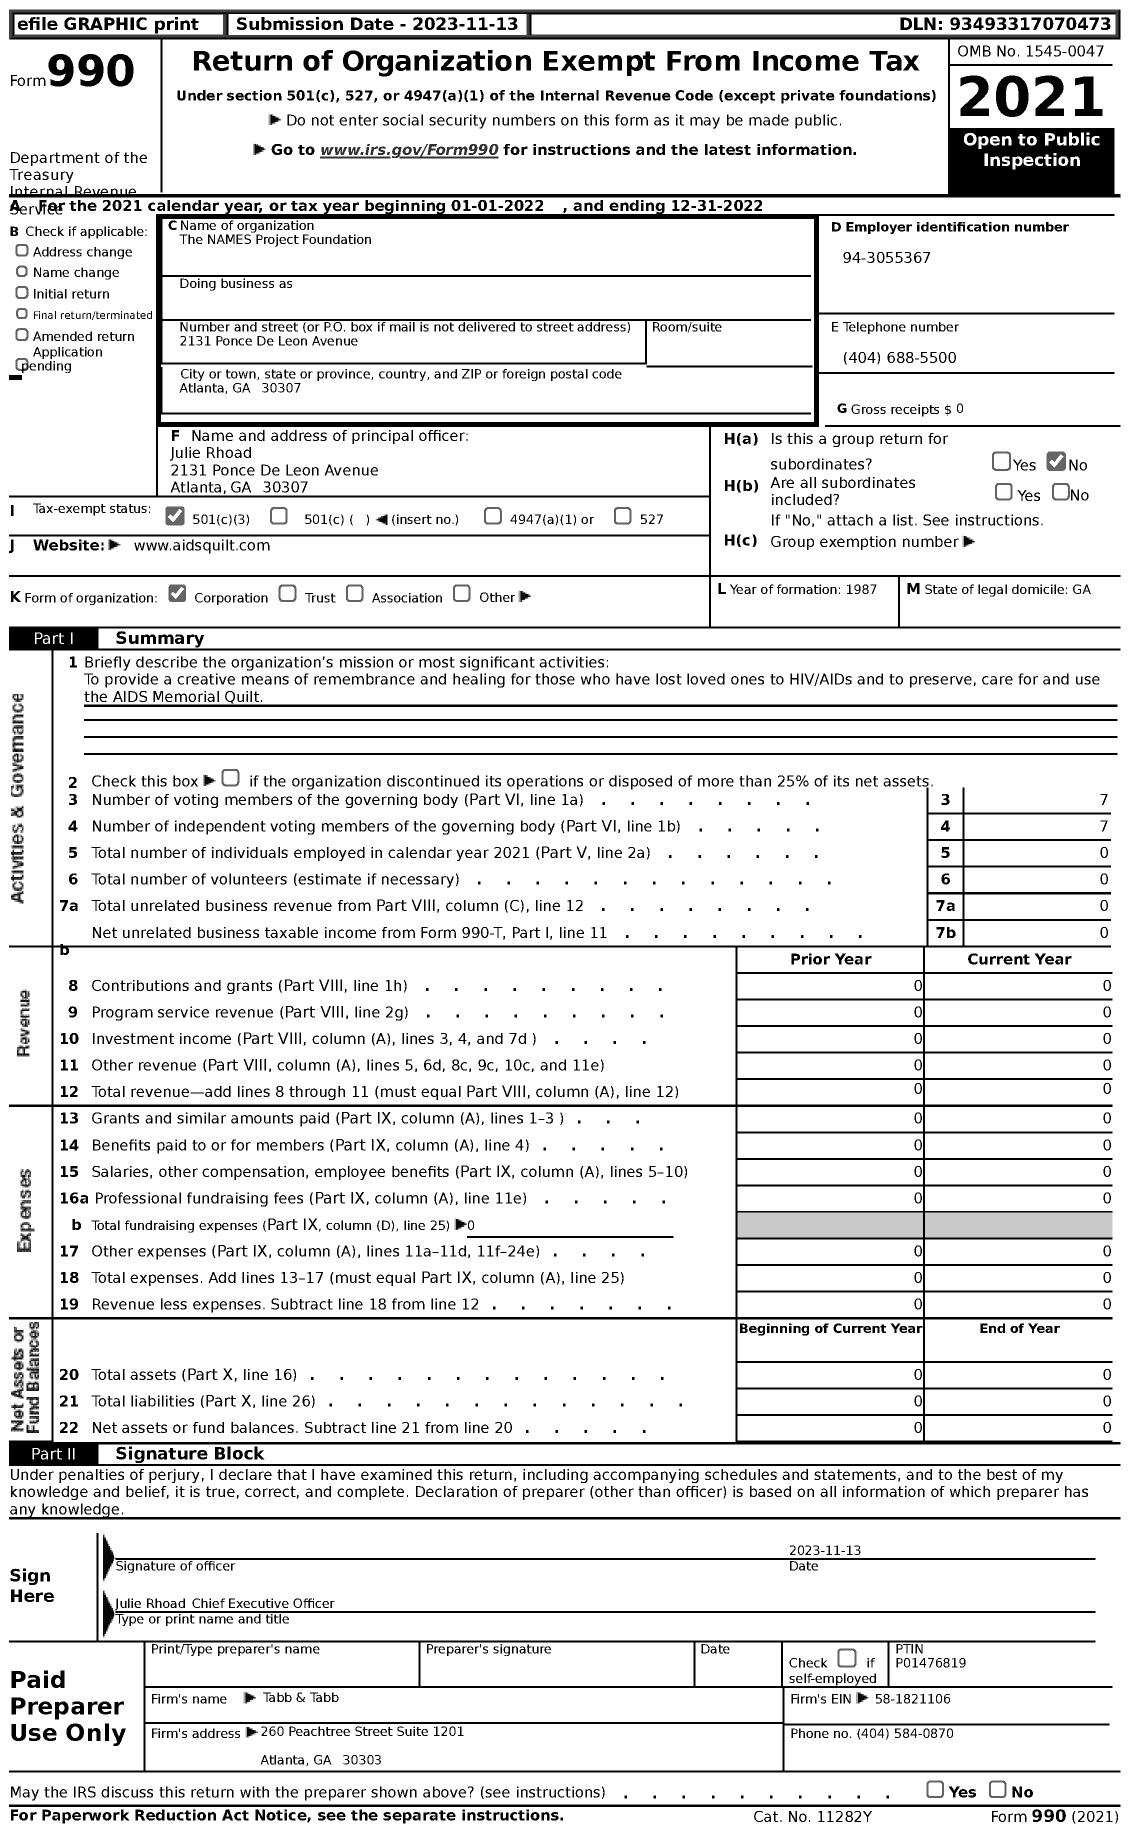 Image of first page of 2022 Form 990 for The NAMES Project Foundation